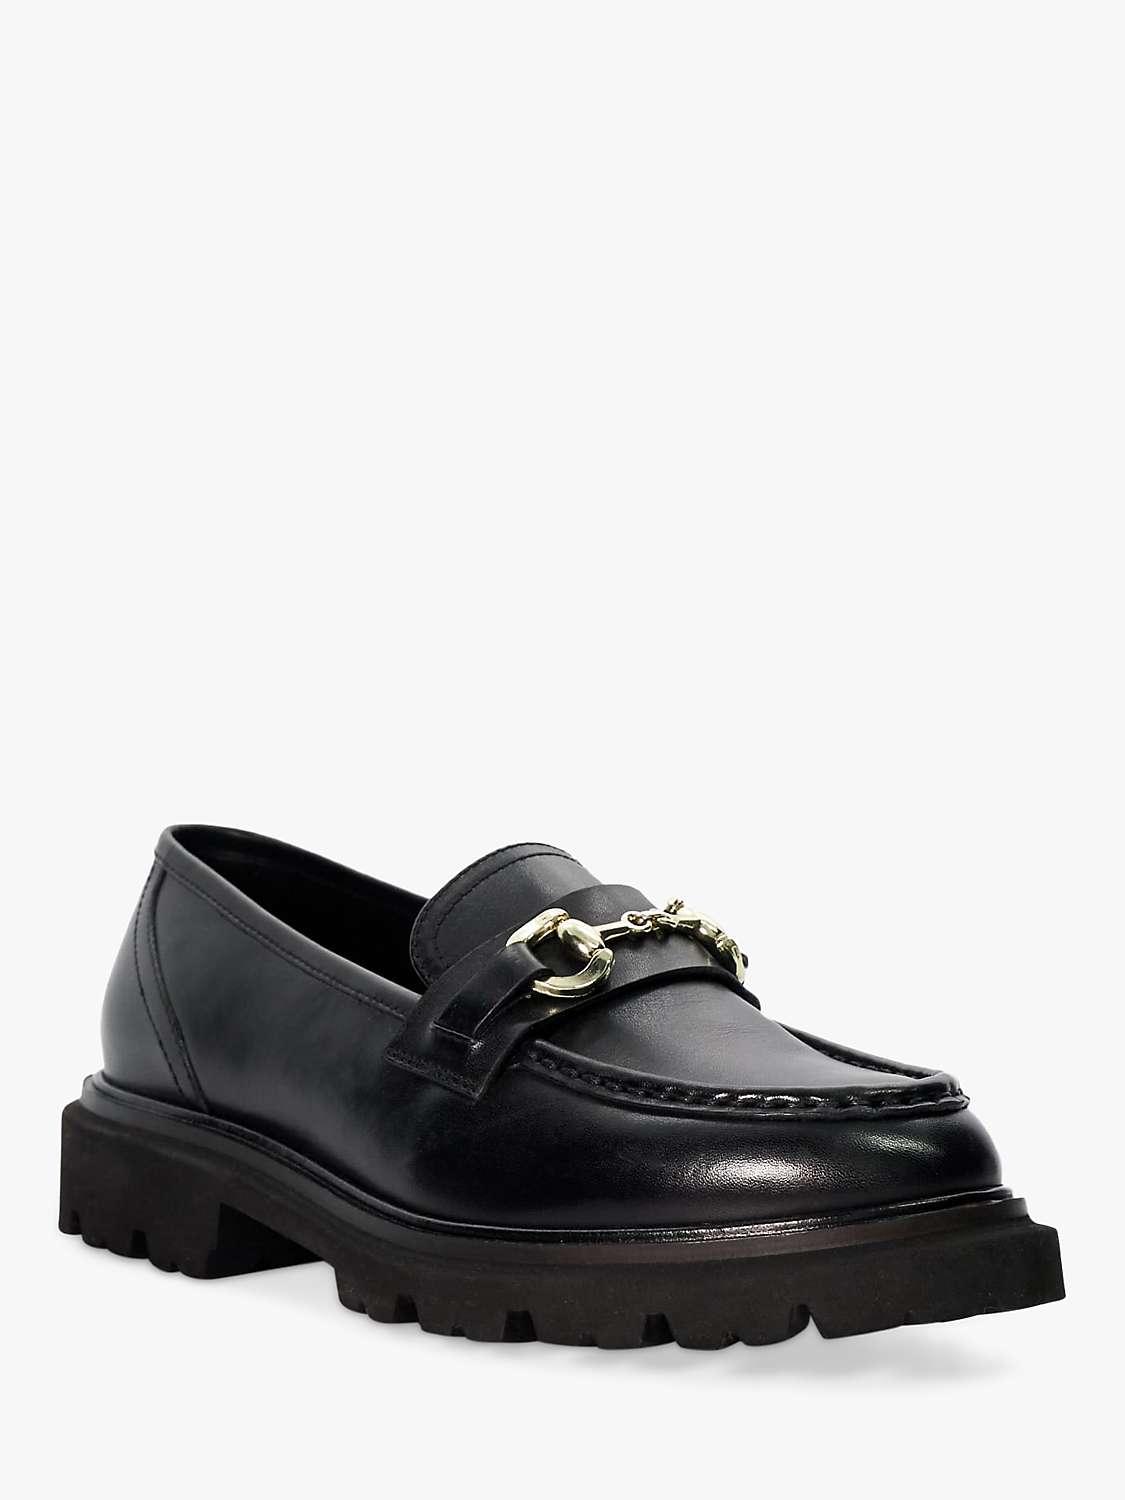 Dune Gallaghers Chunky Leather Snaffle Loafers, Black at John Lewis ...